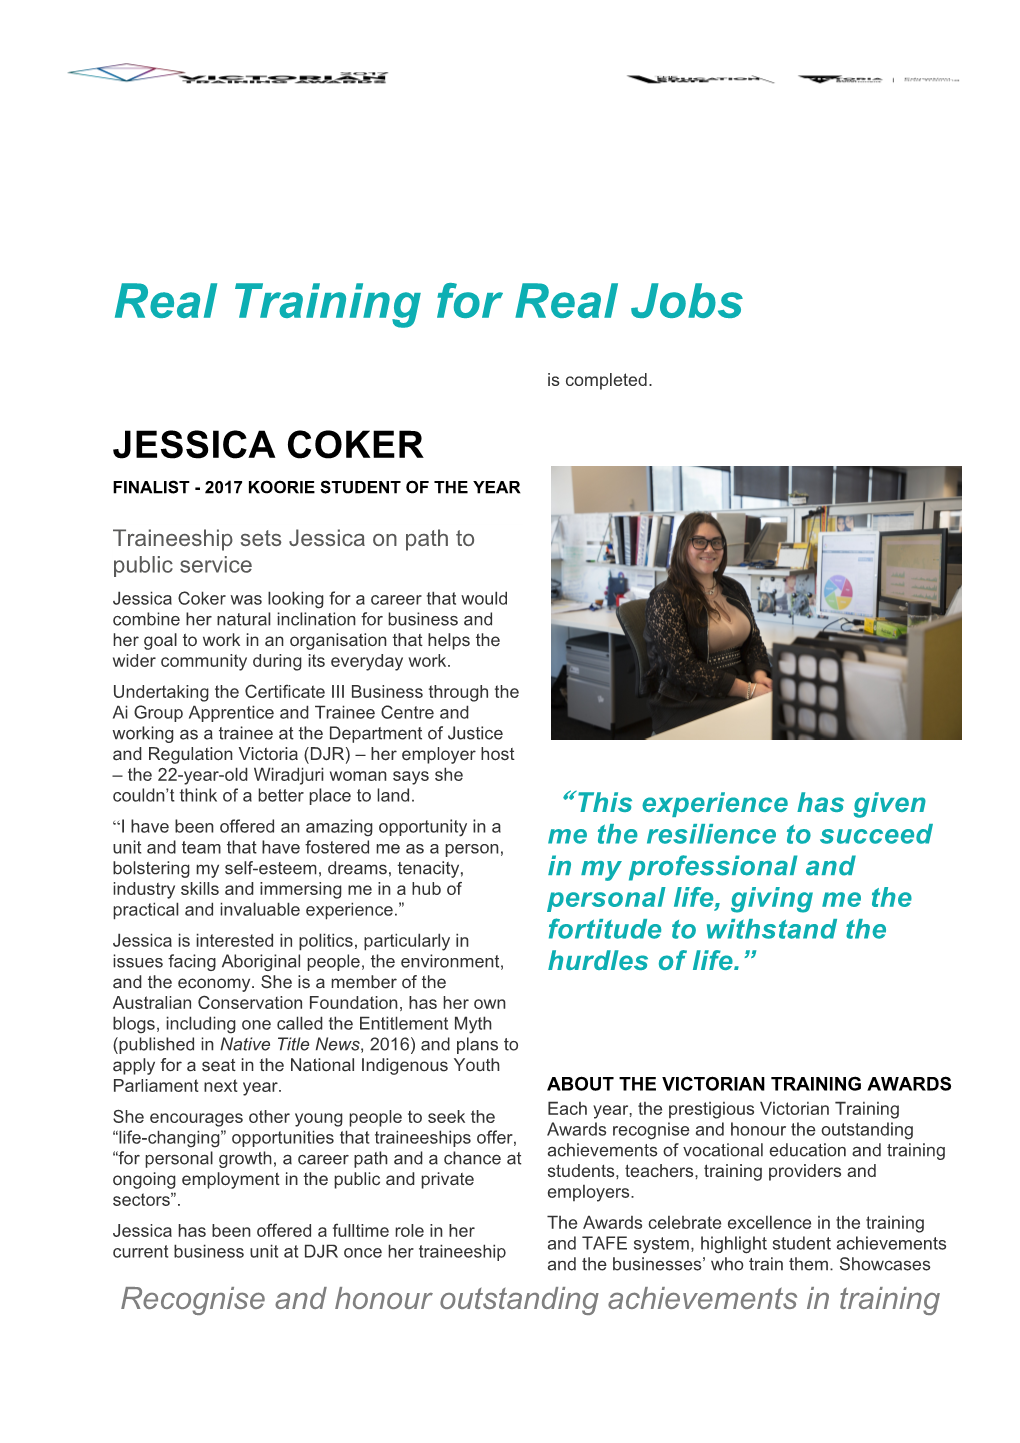 Real Training for Real Jobs